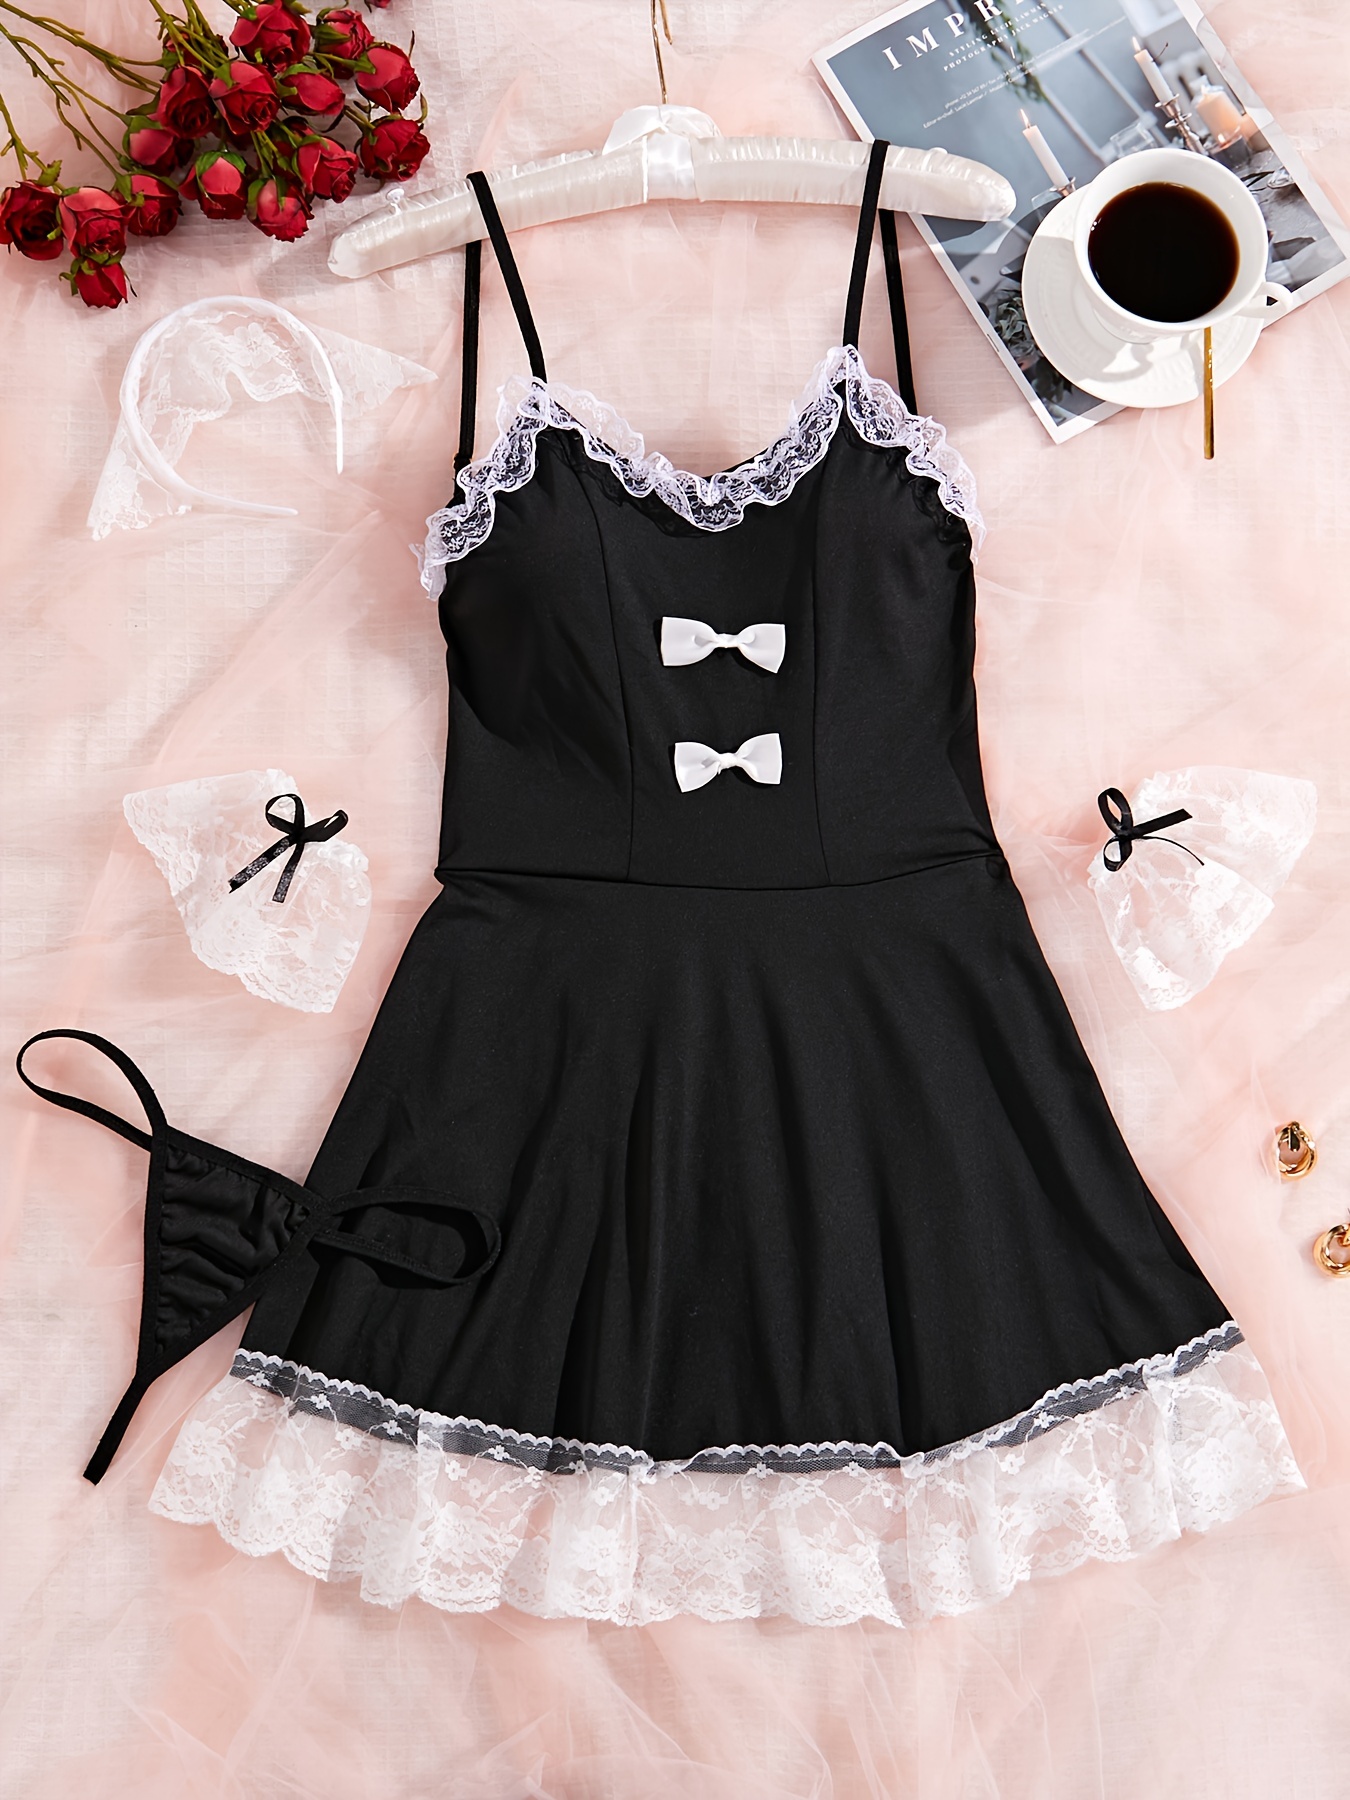 naughty maid role play costume contrast lace bow tie backless slip dress womens sexy lingerie underwear